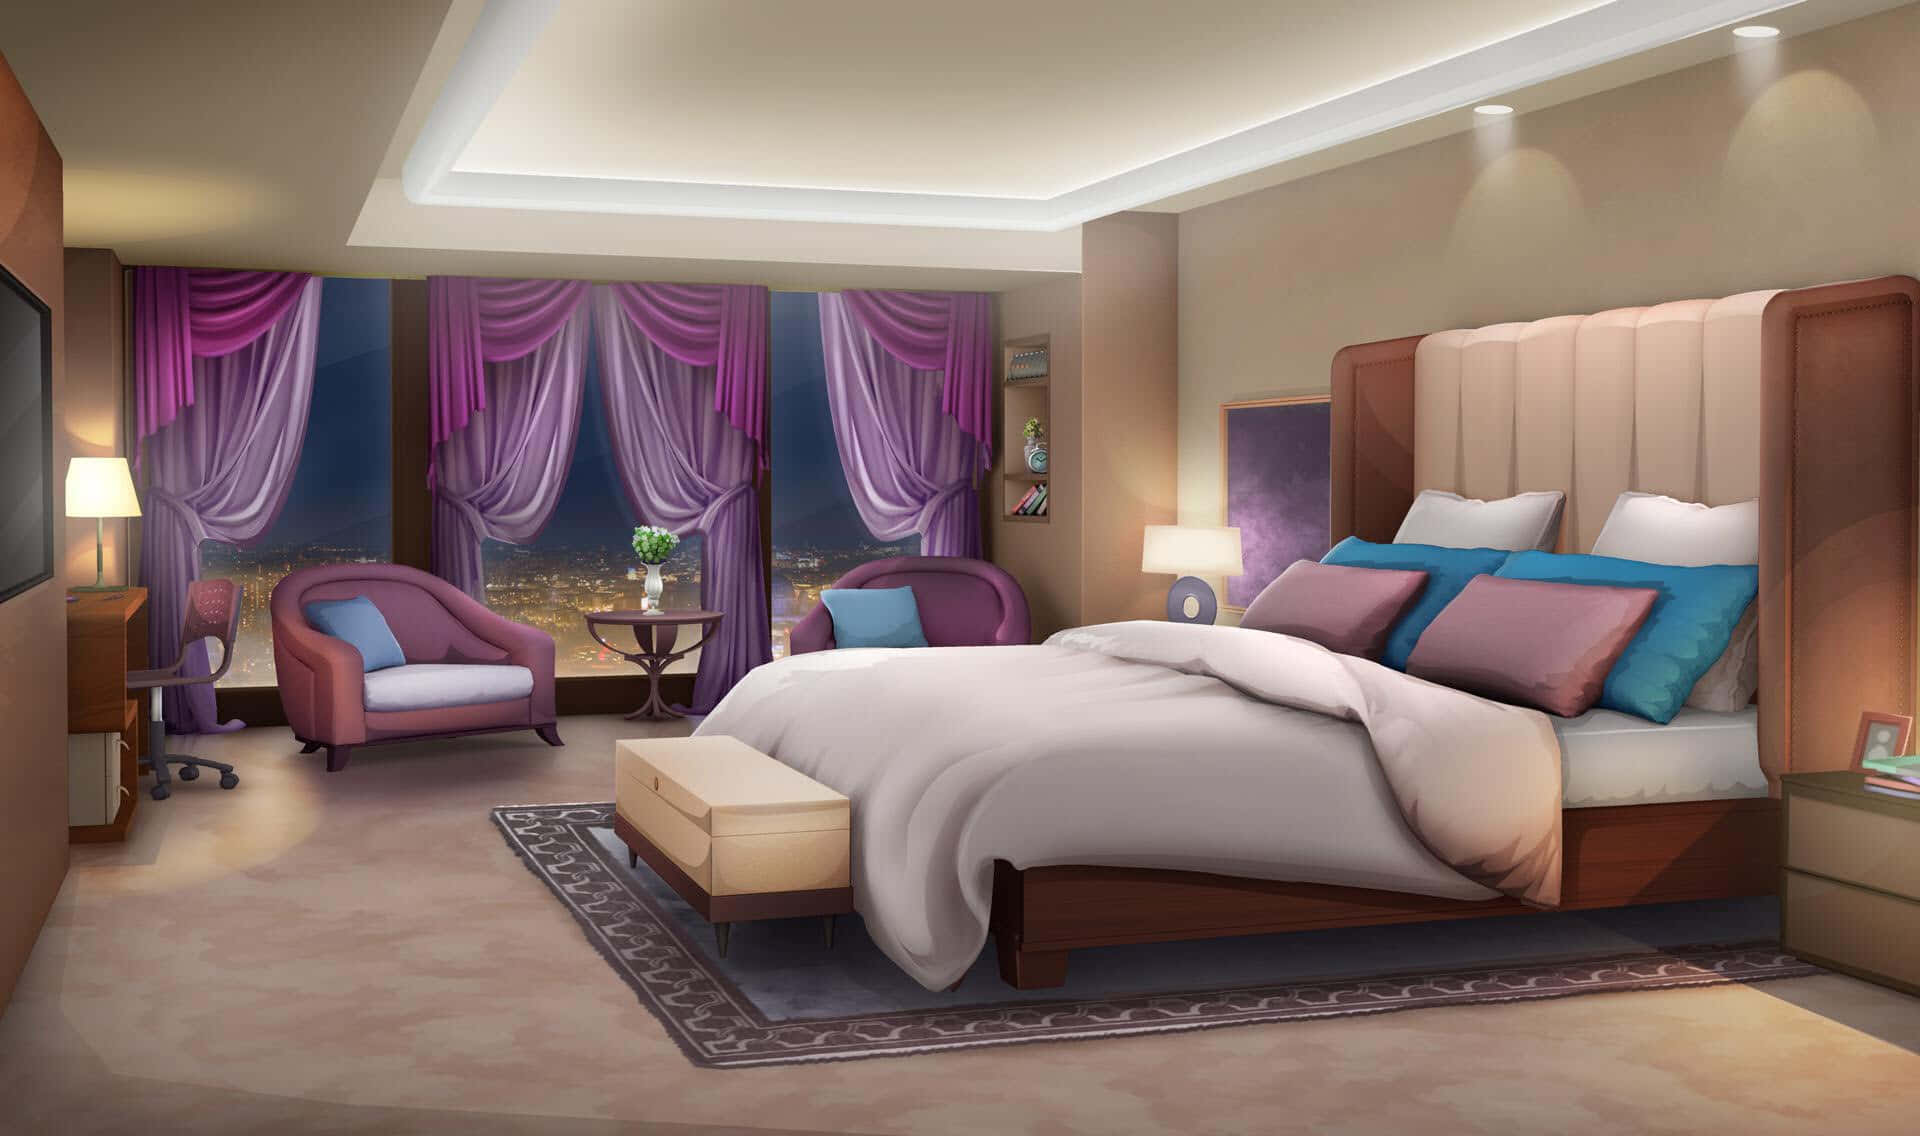 Dream of a cozy retreat with this Cute Anime Bedroom background